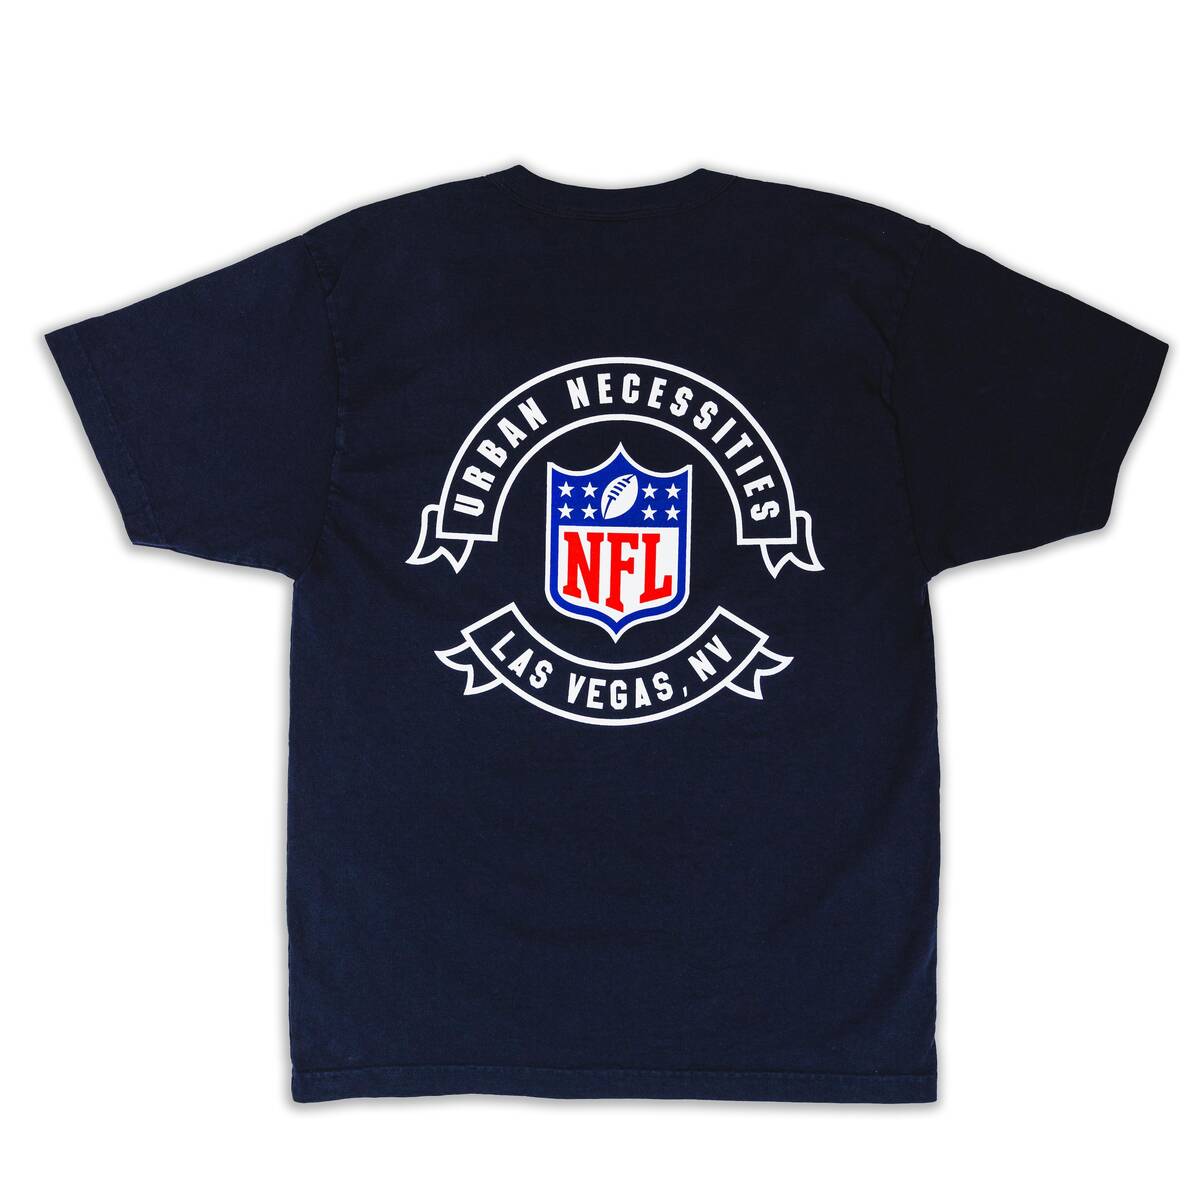 A T-shirt designed by the Las Vegas based Urban Necessities for the Origins: an NFL collection ...